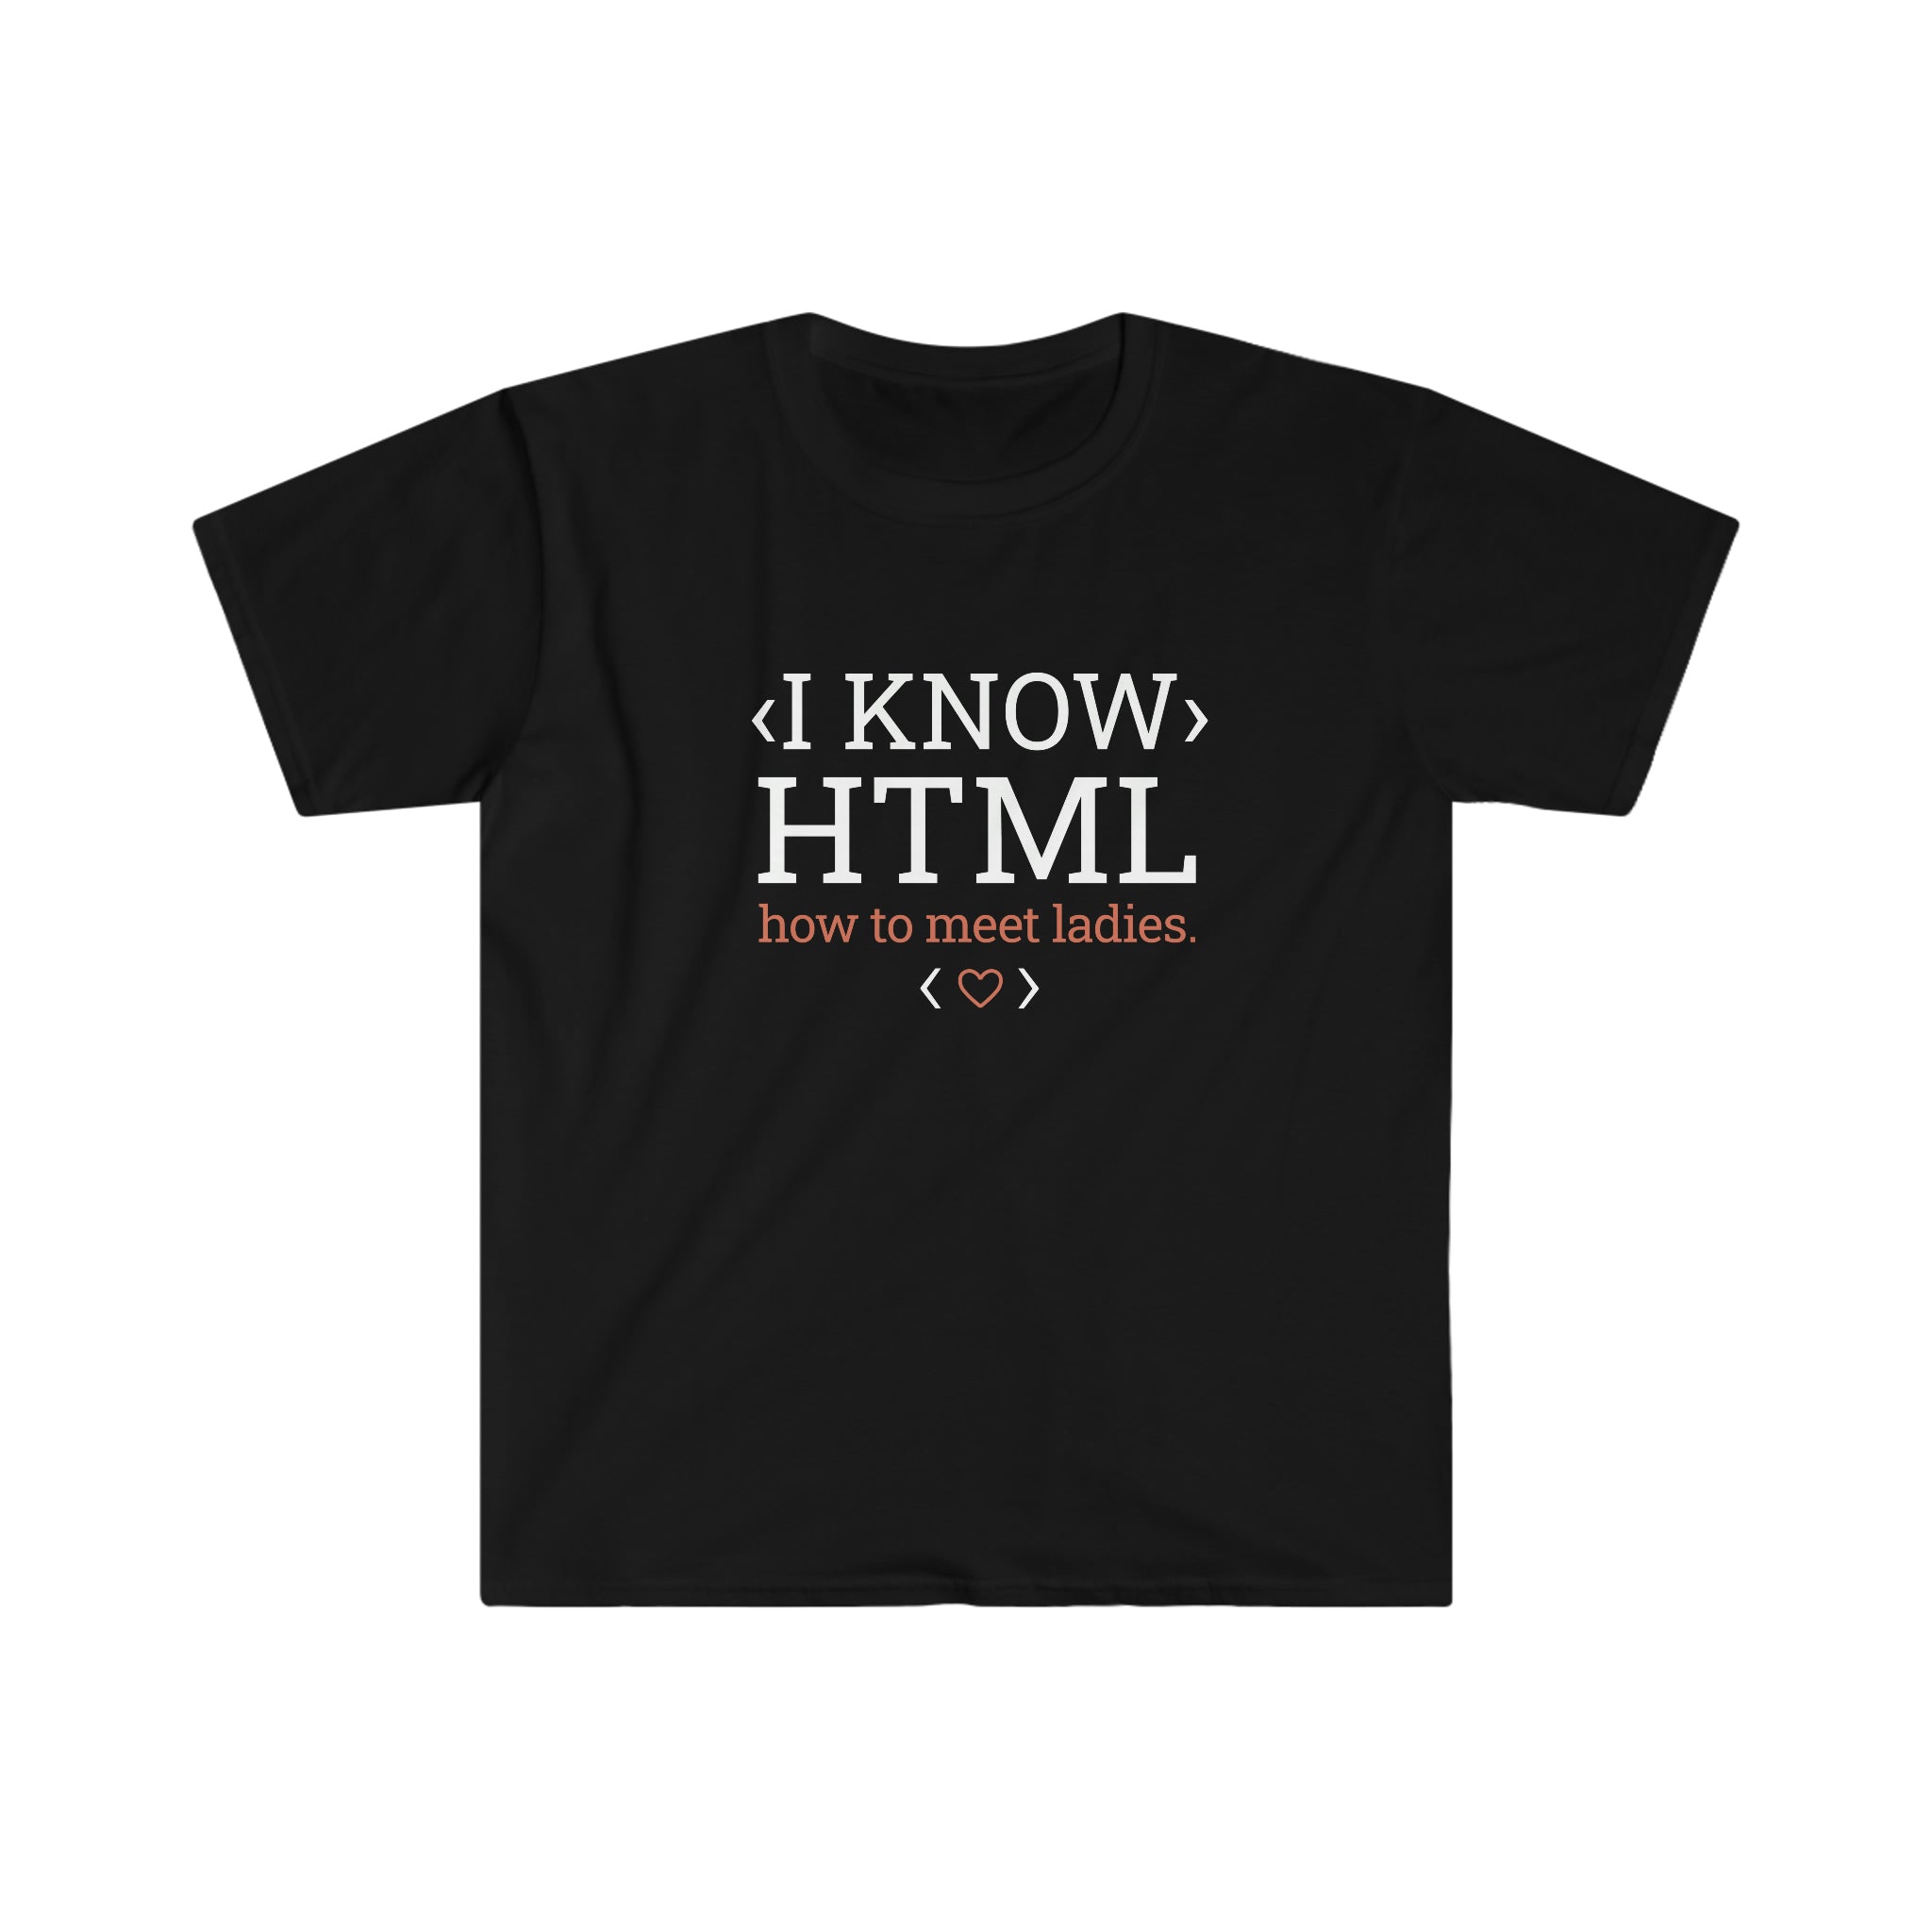 I Know HTML T-Shirt How to meet ladies with a heart symbol, designed for the tech savvy.